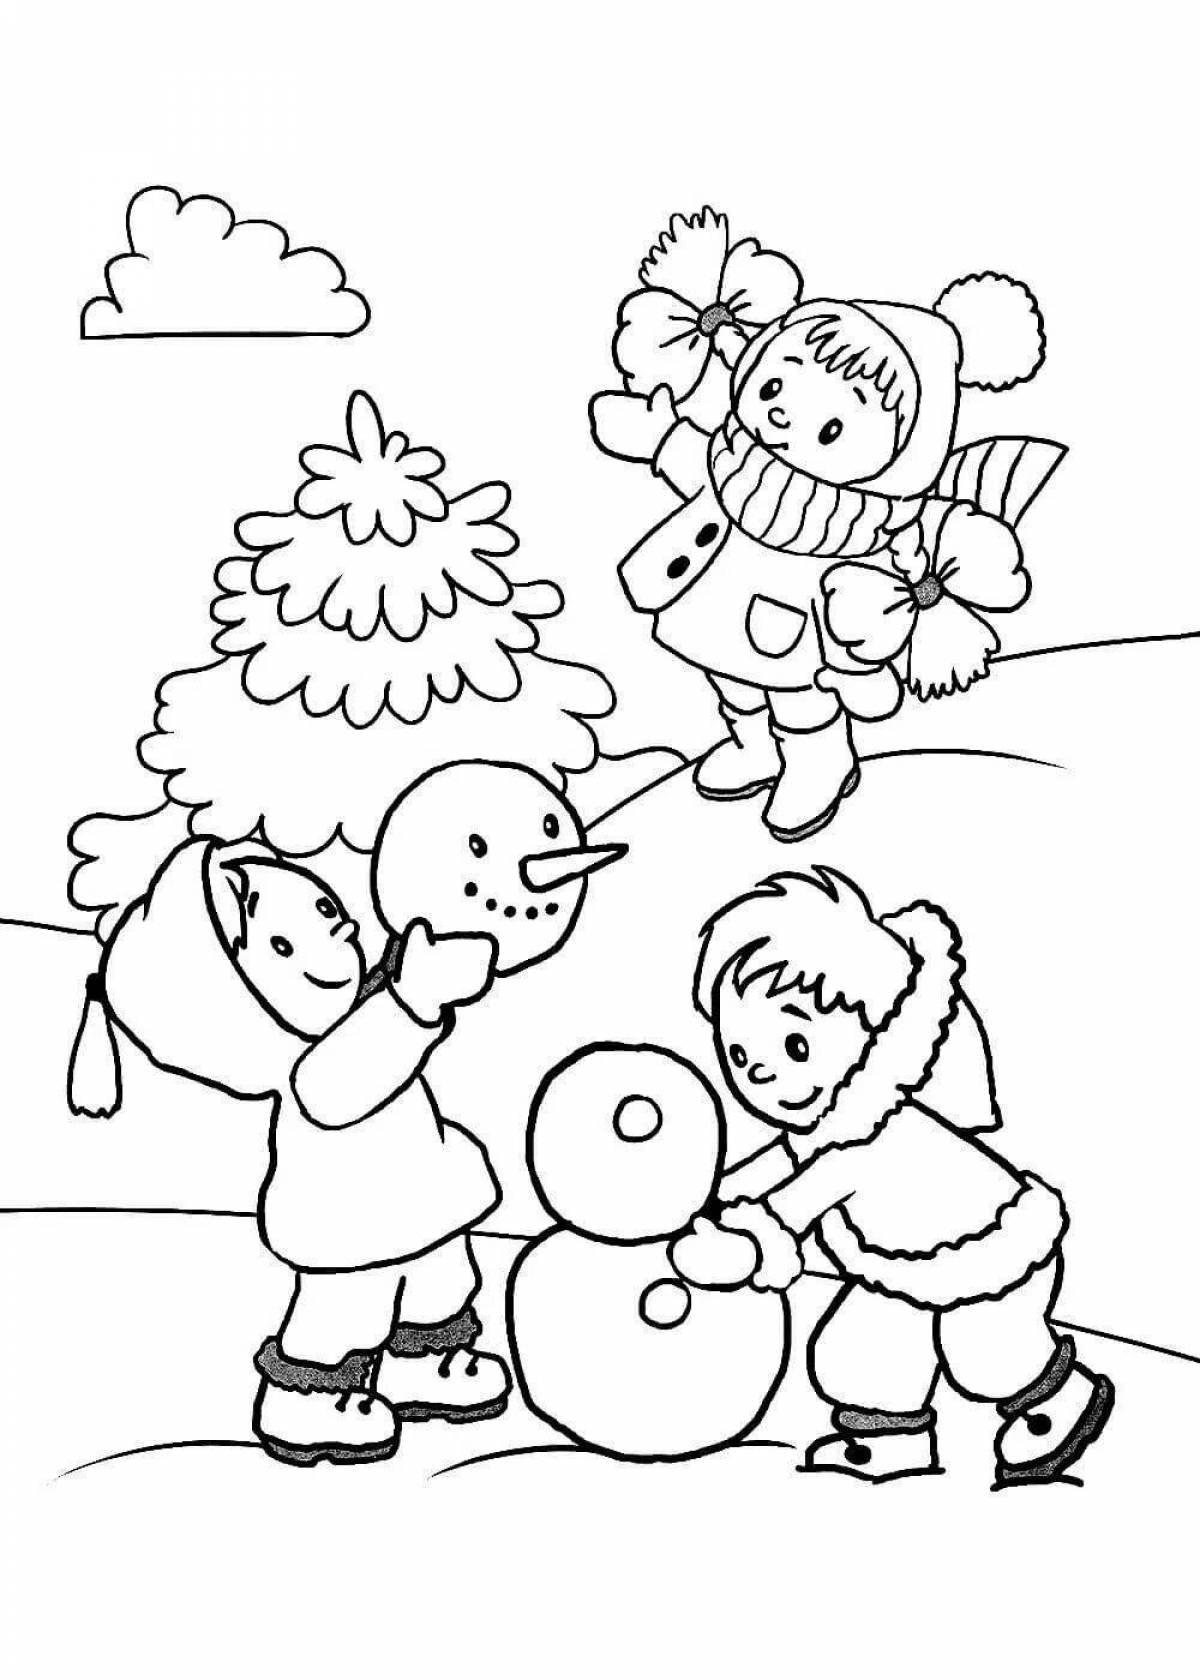 Cute winter coloring for kids 2 3